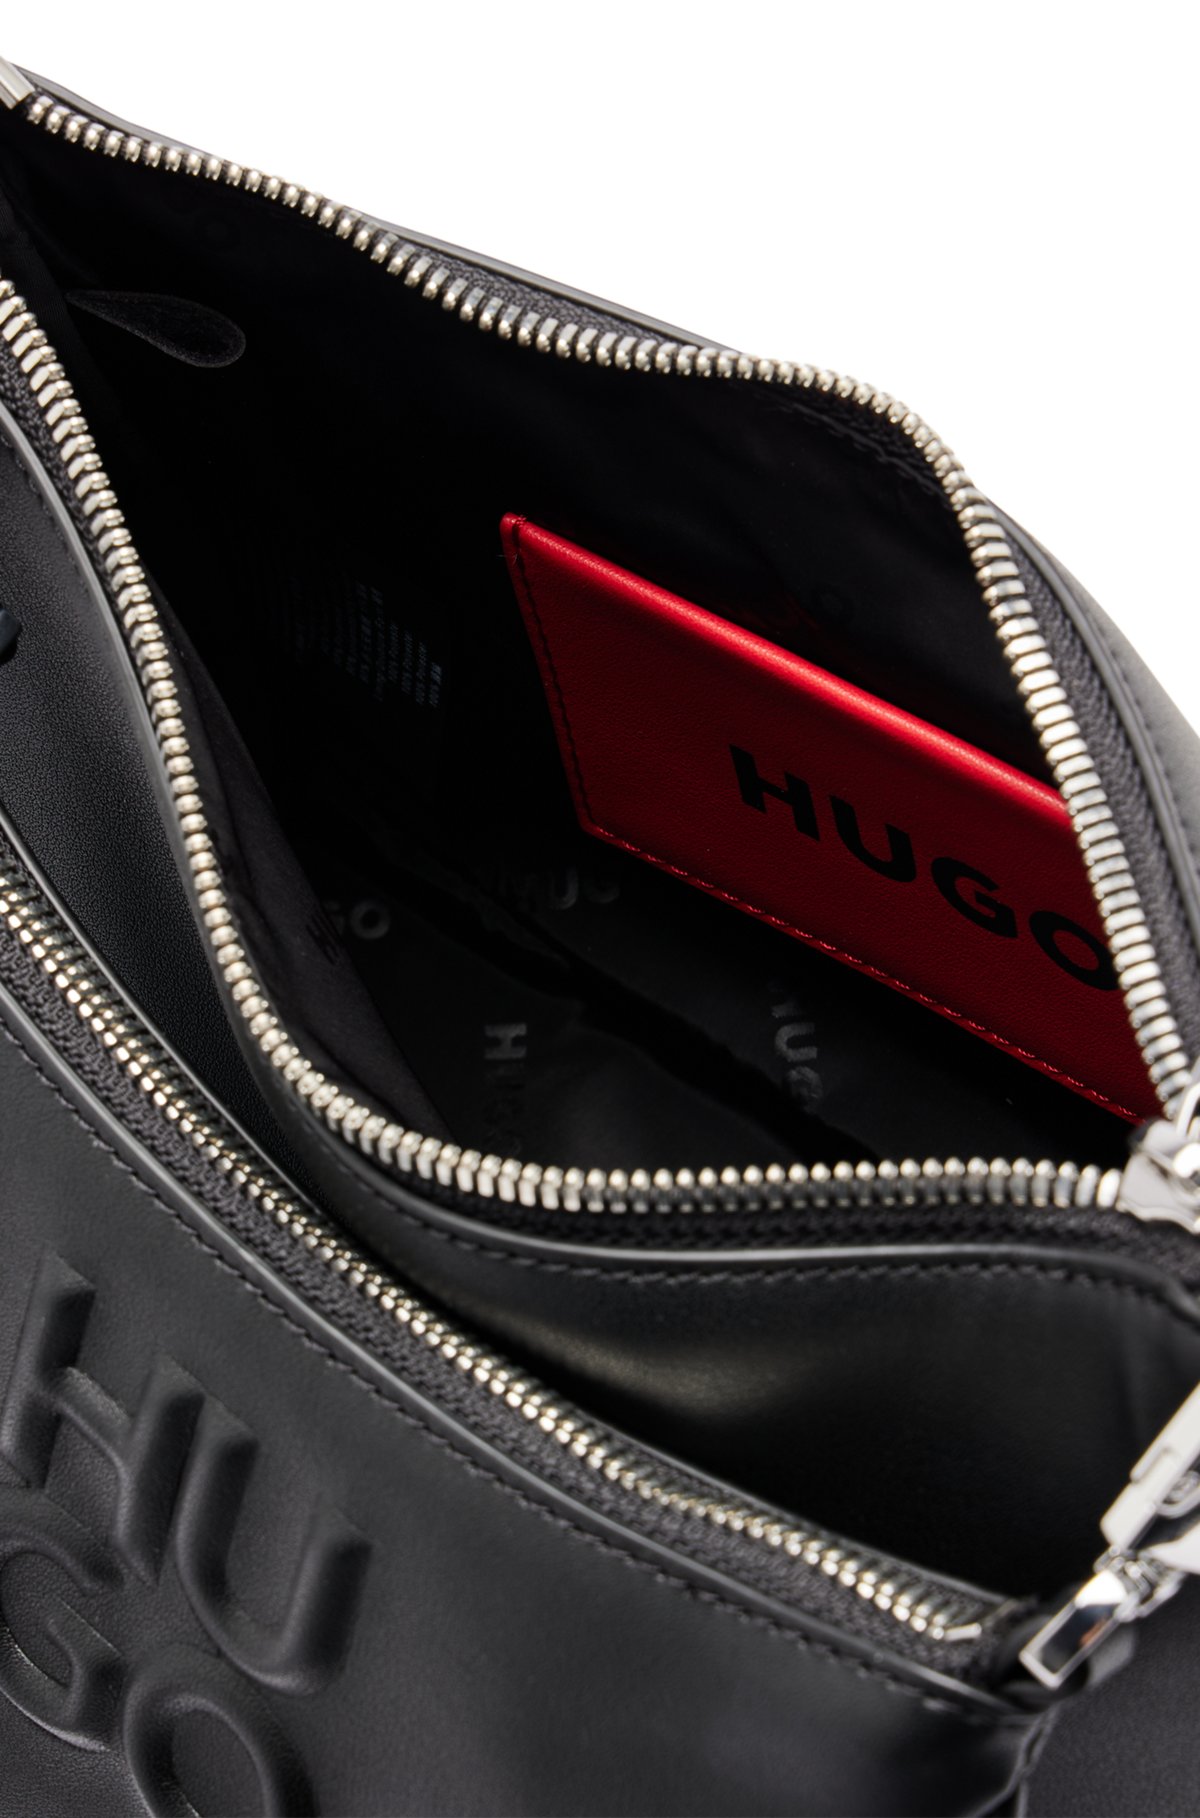 HUGO - Crossbody bag with detachable pouches and debossed branding